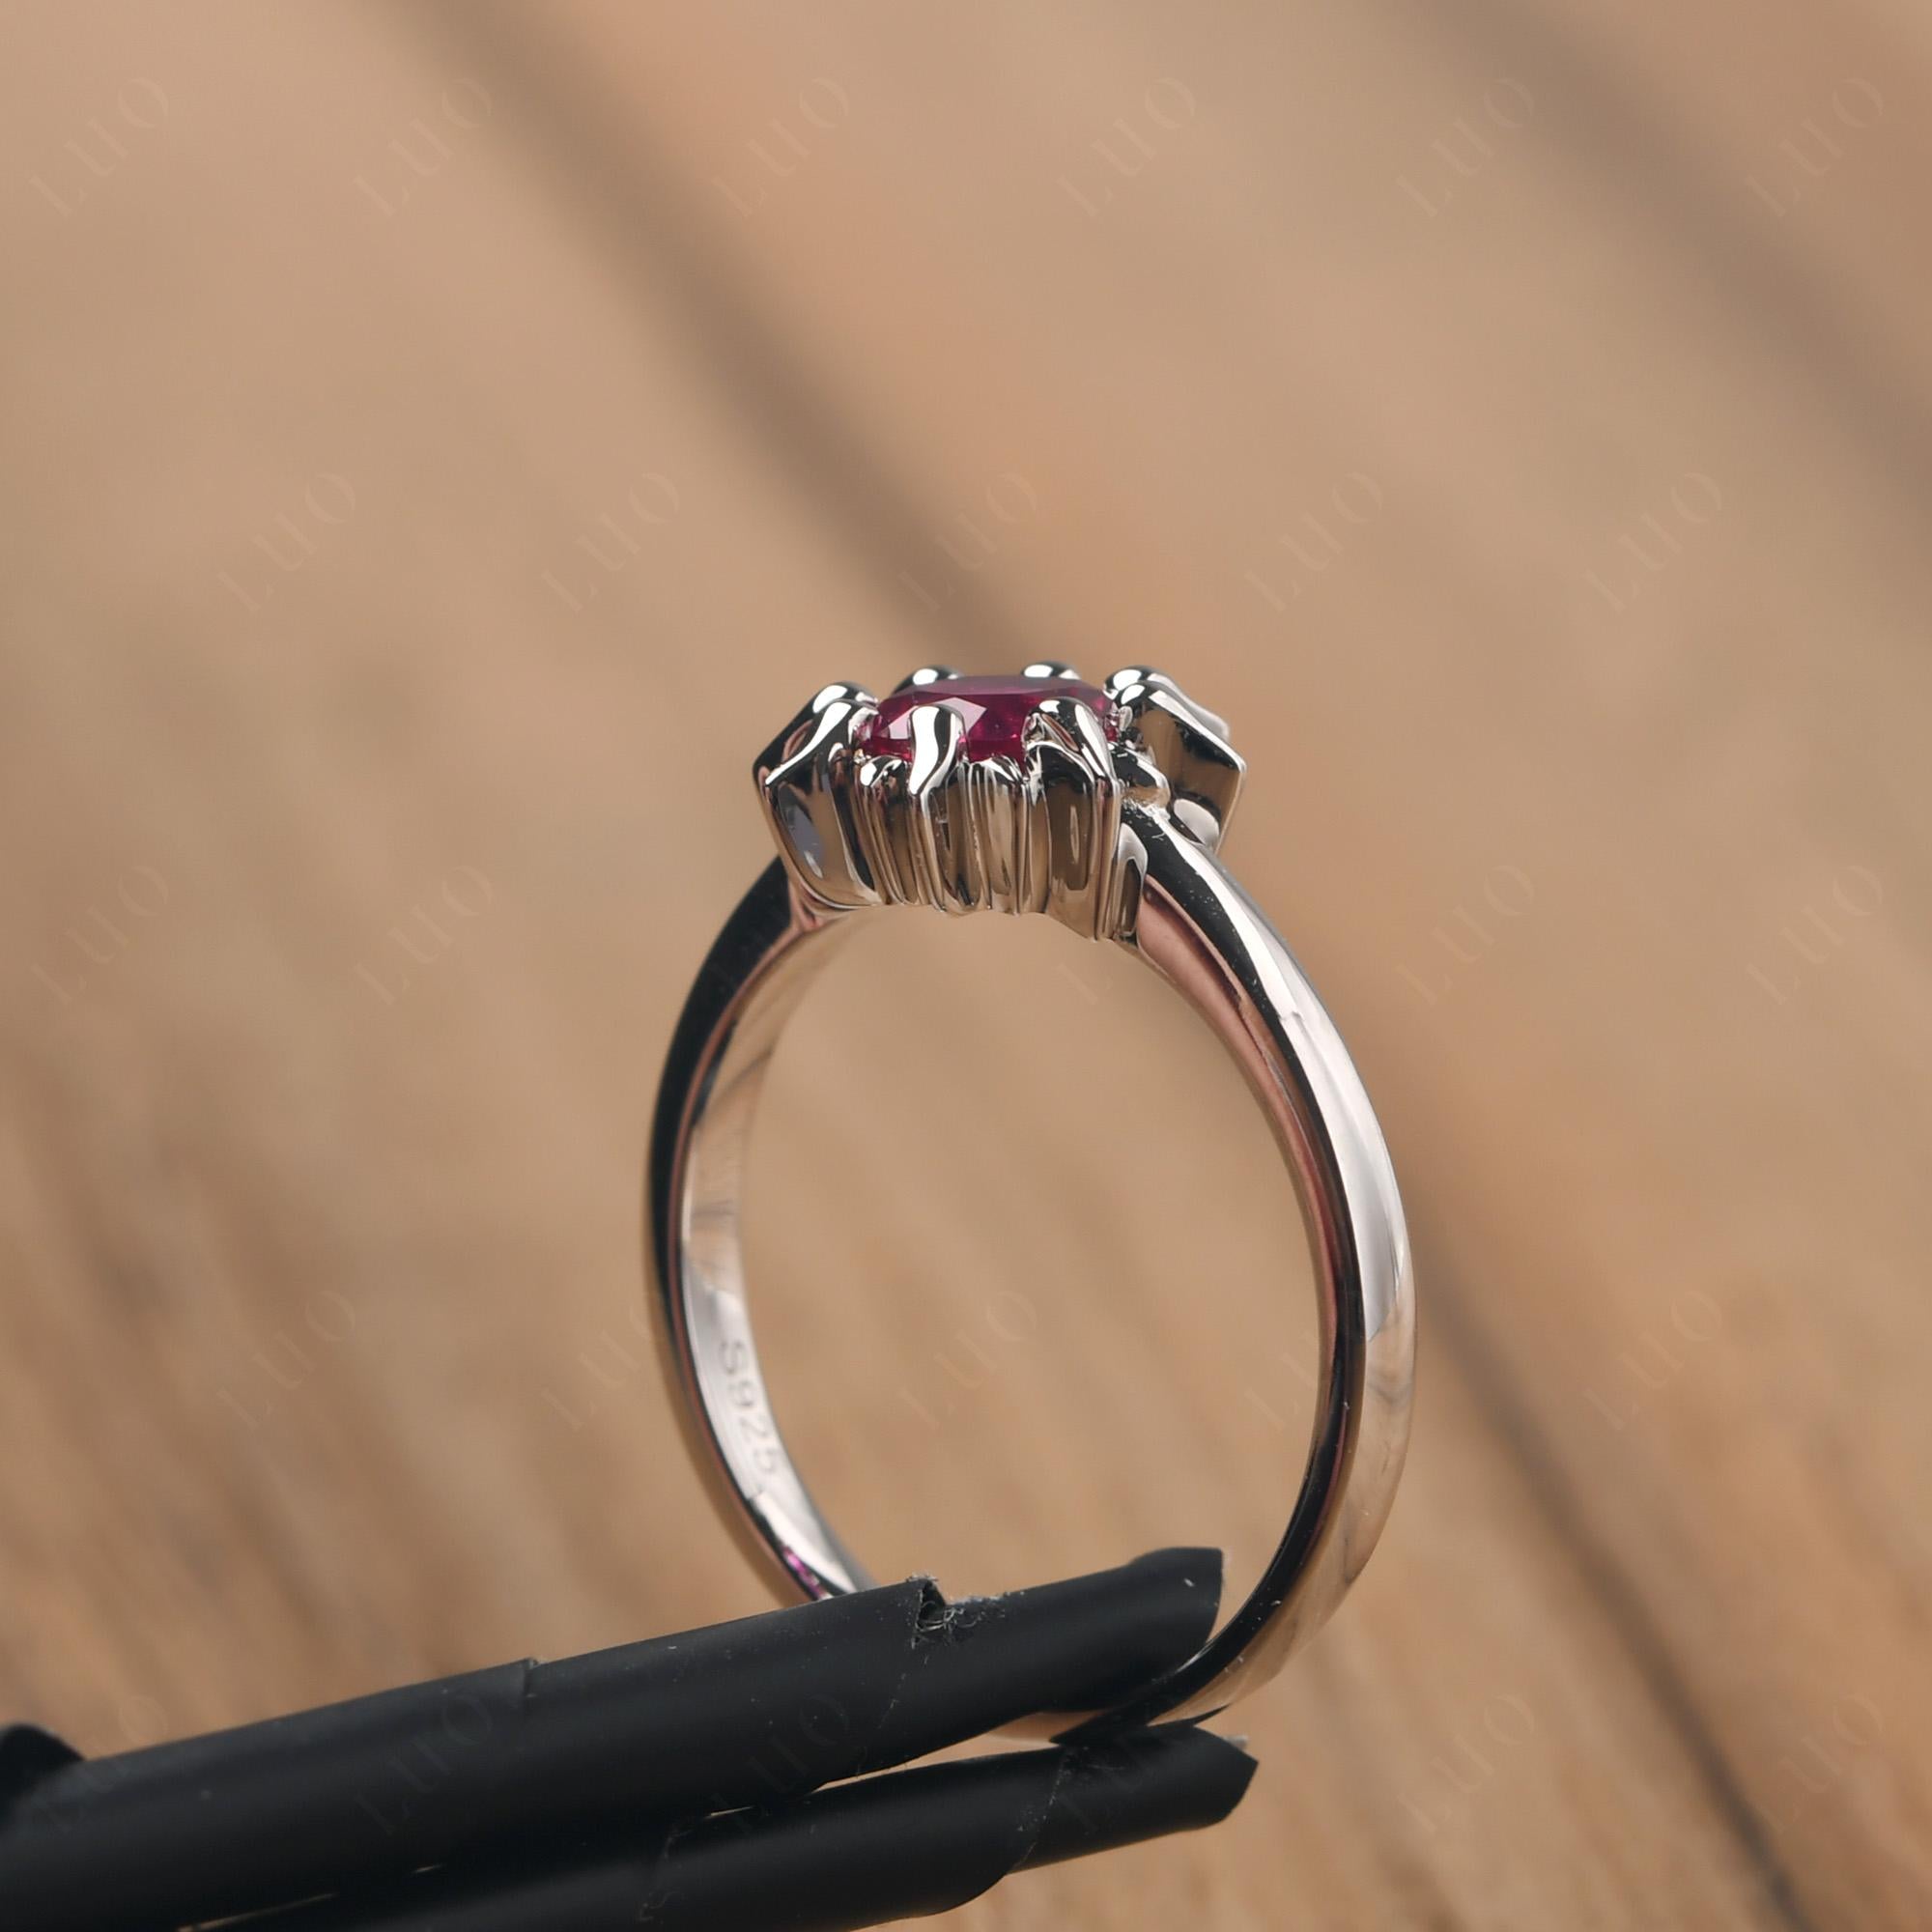 Sunburst Lab Grown Ruby Solitaire Ring - LUO Jewelry